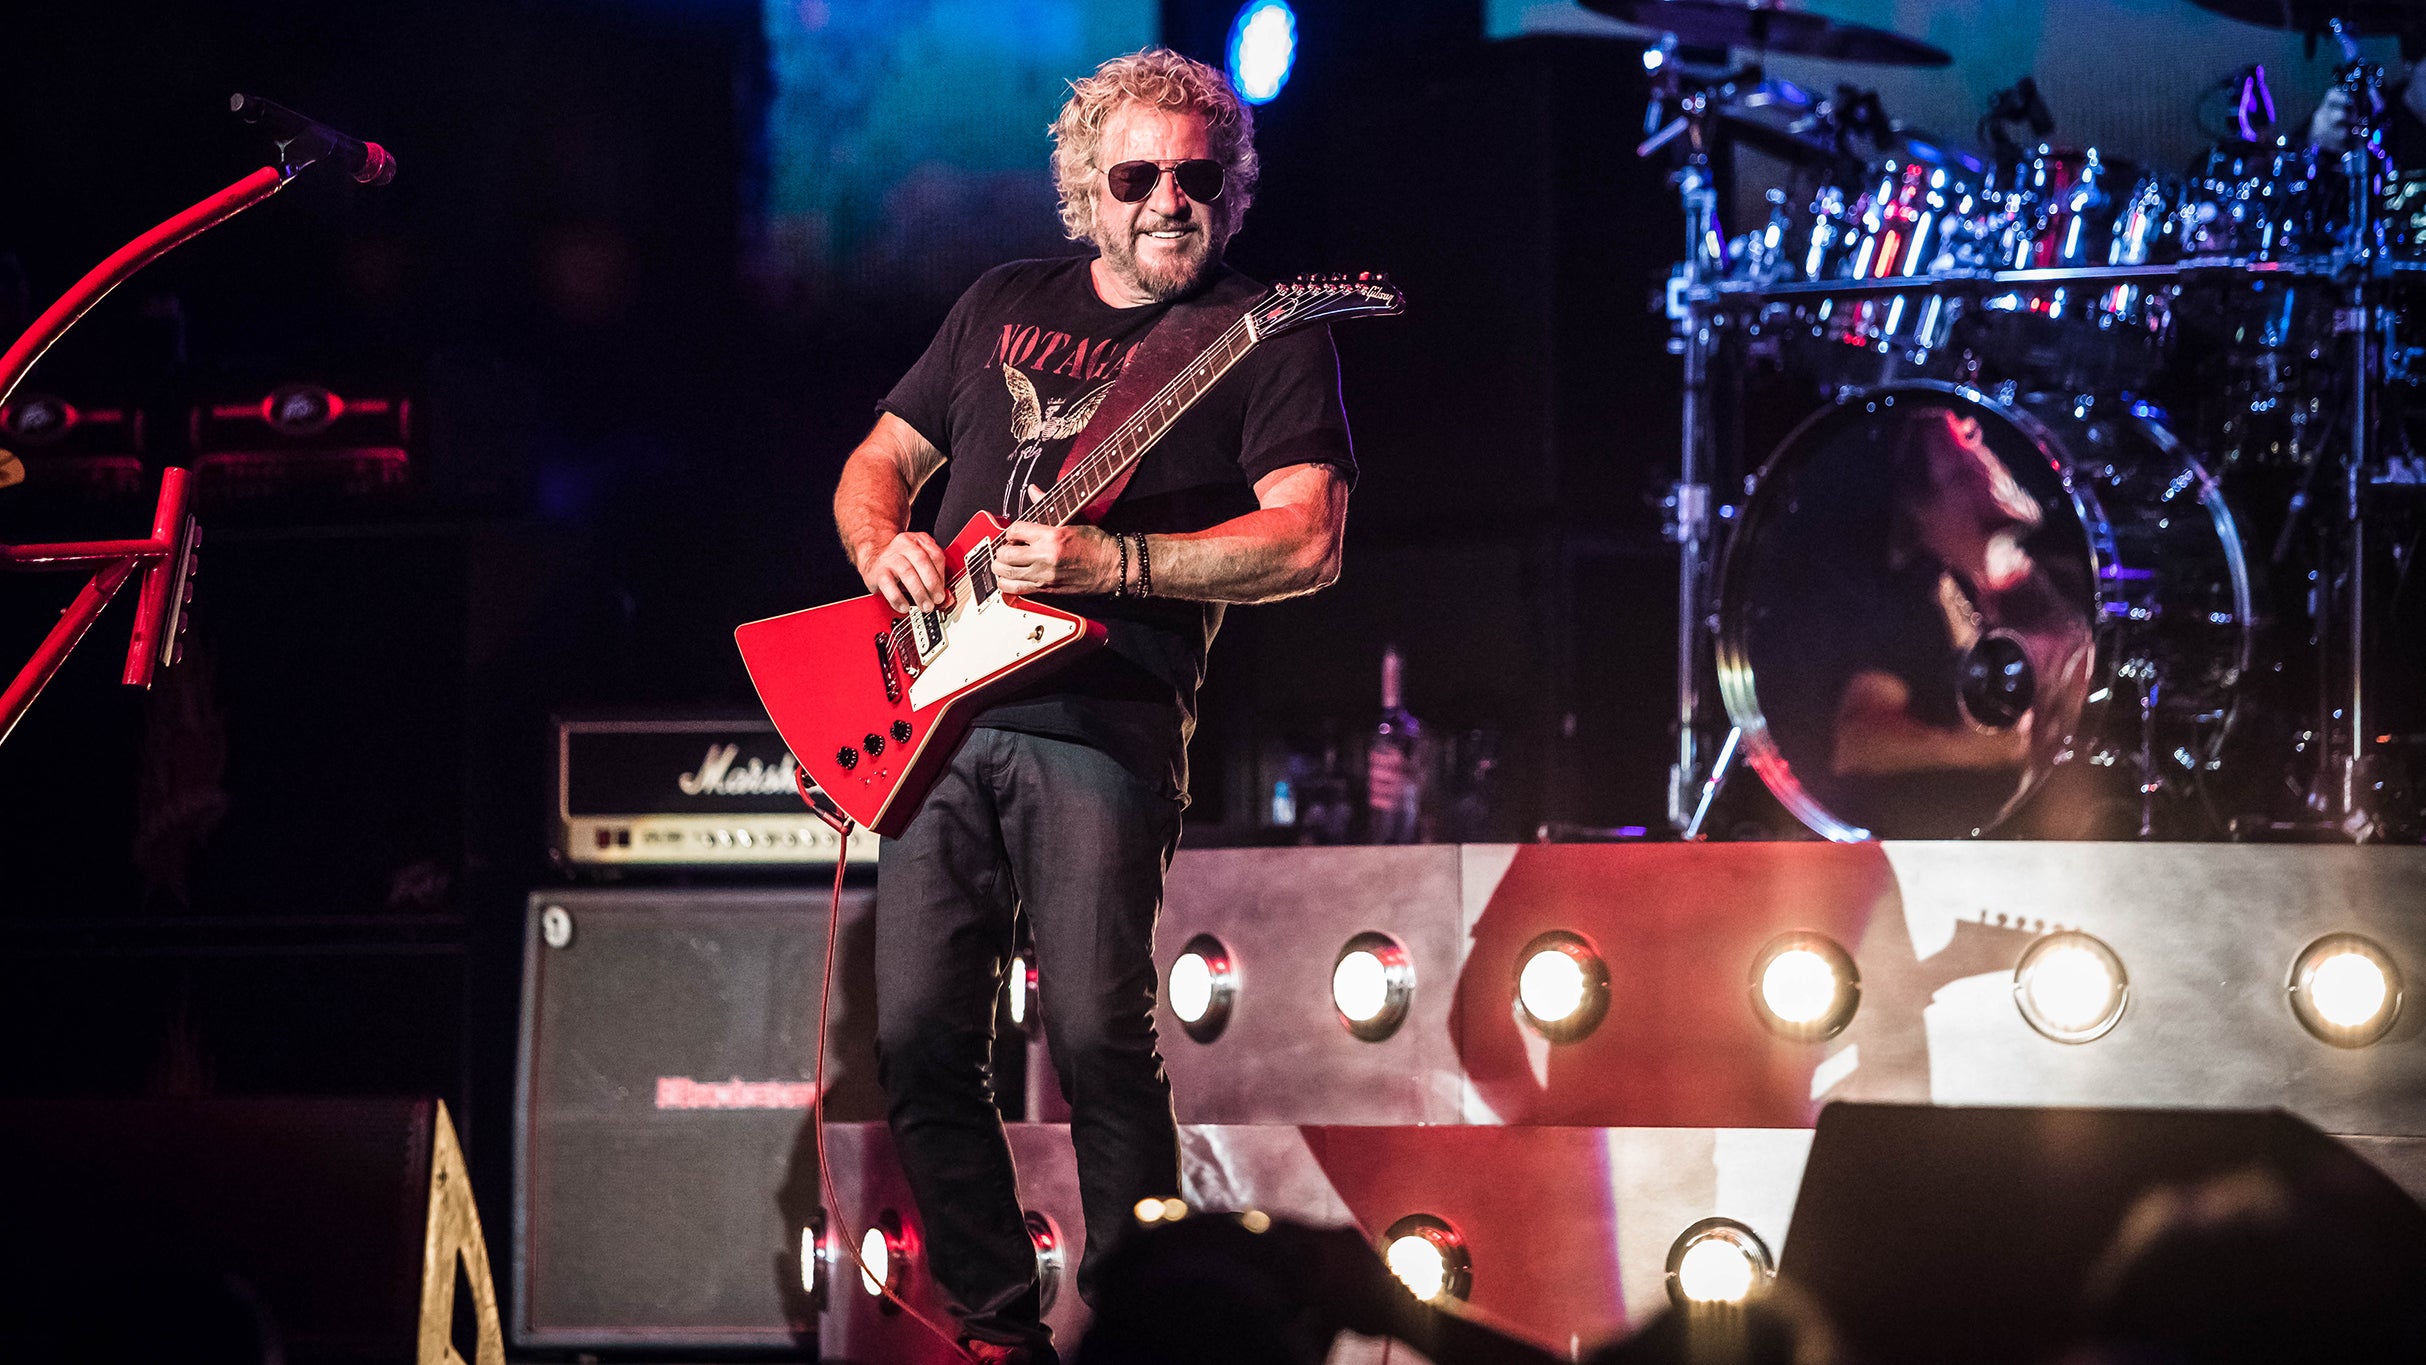 SAMMY HAGAR The Best of All Worlds Tour with special guest Loverboy in Woodlands promo photo for Citi Postsale presale offer code